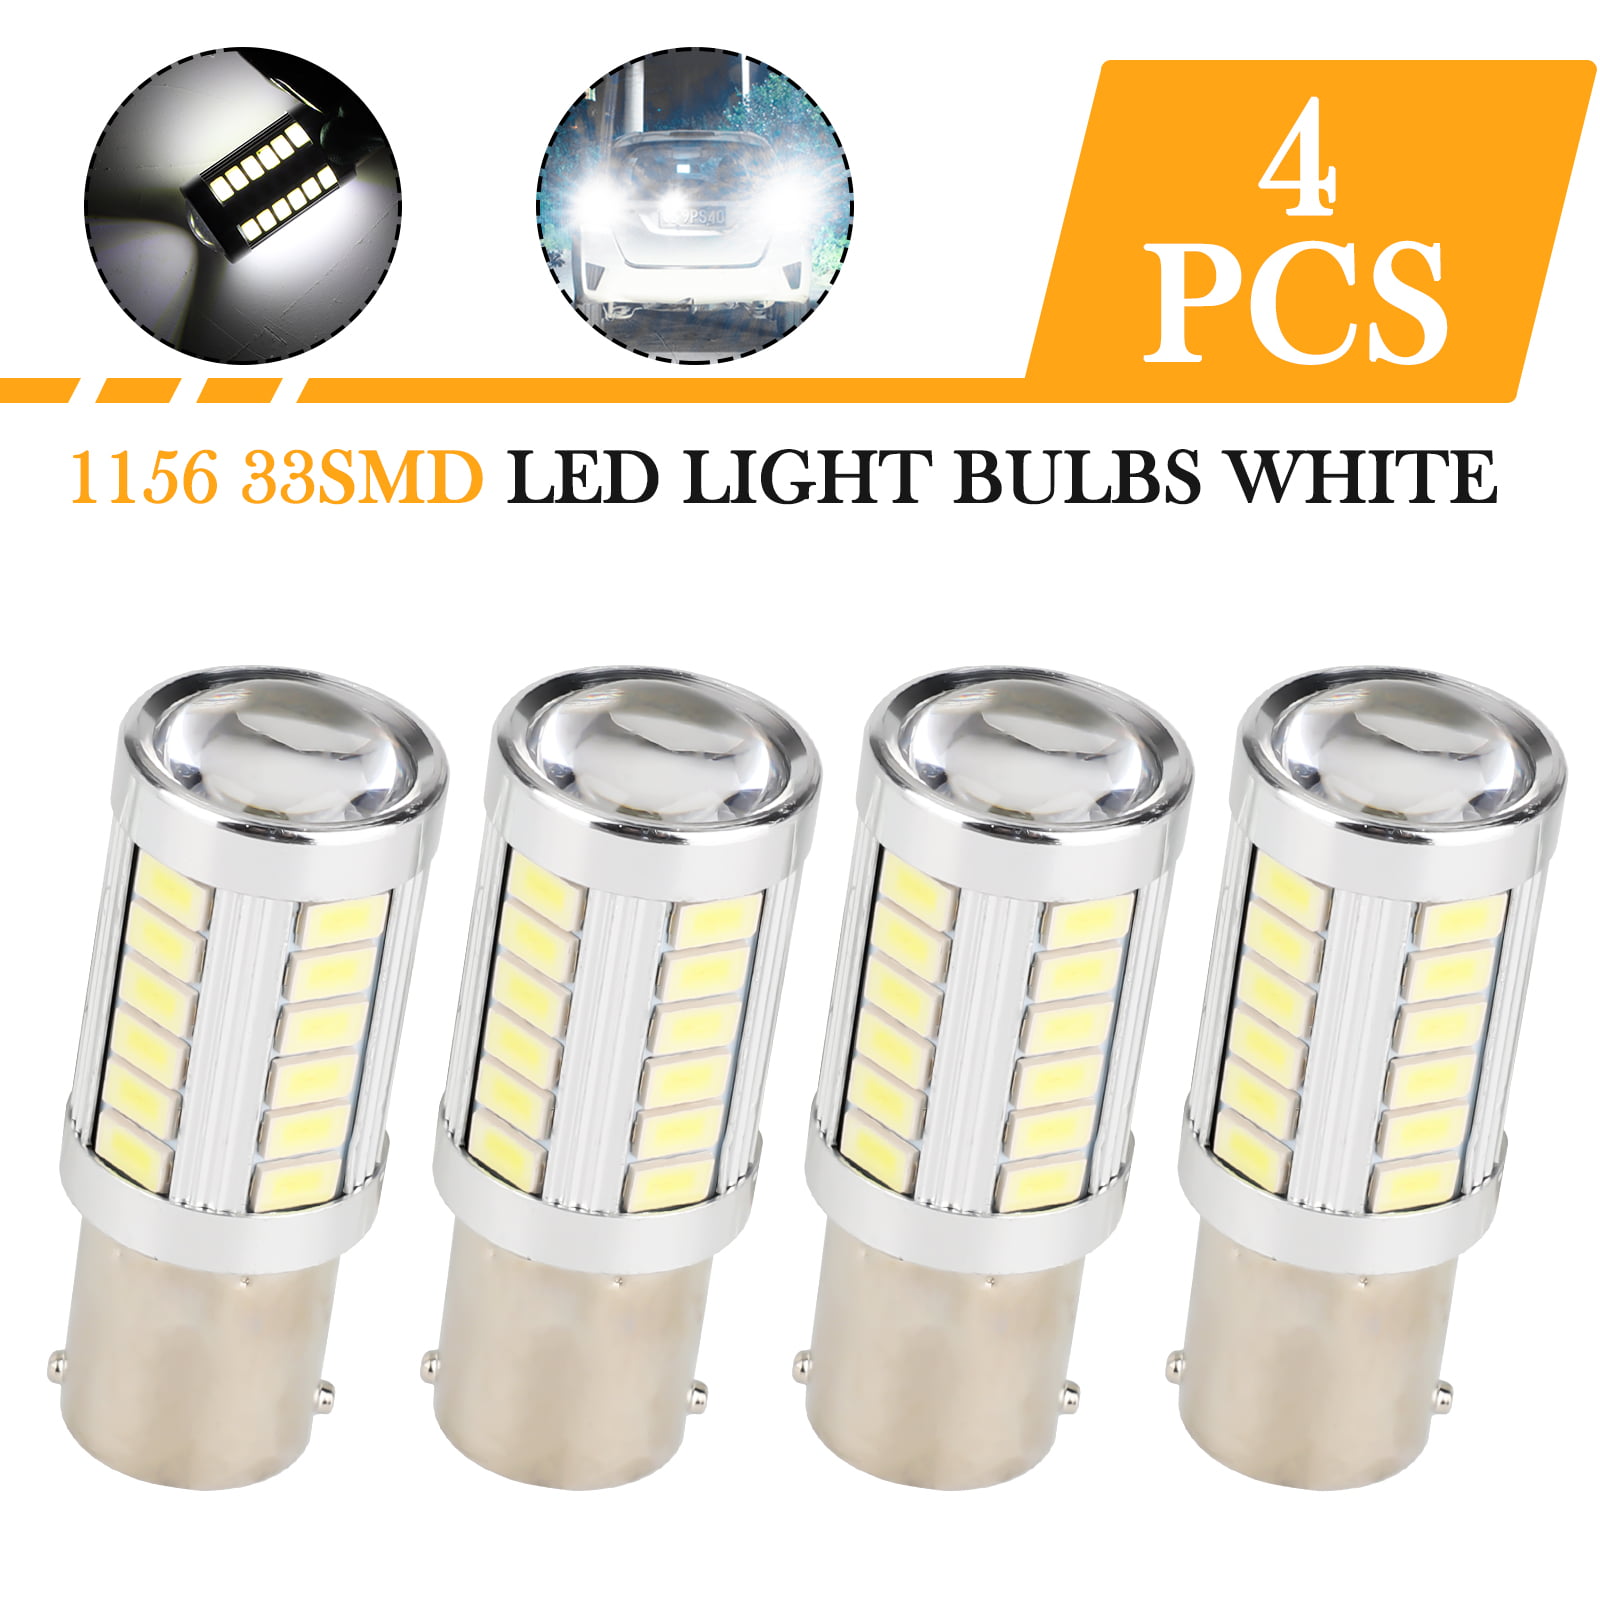 Details about   10X 1156 BA15S 18-SMD RV Camper Cool White LED Light Bulbs Tail Backup USA STOCK